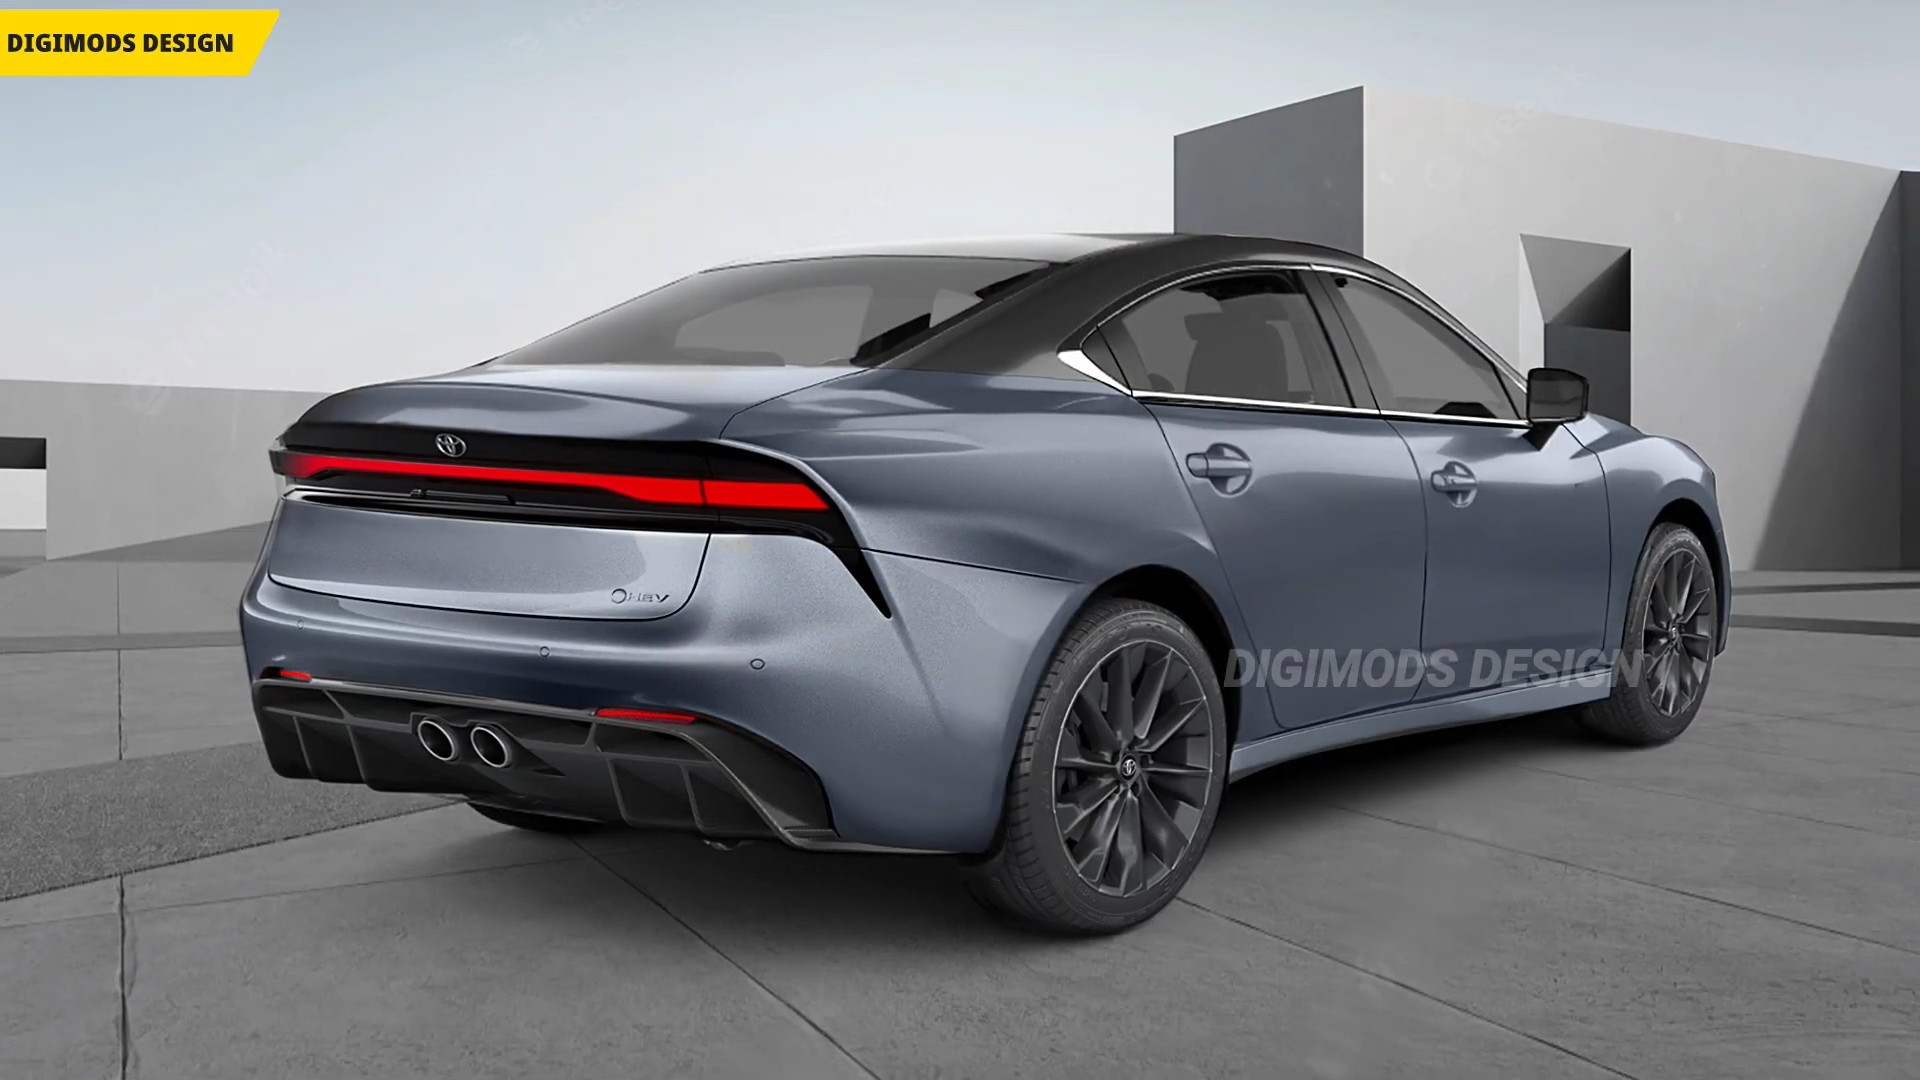 cgi-2024-toyota-camry-hev-takes-after-prius-rather-than-2023-crown-feels-sporty-5.jpg